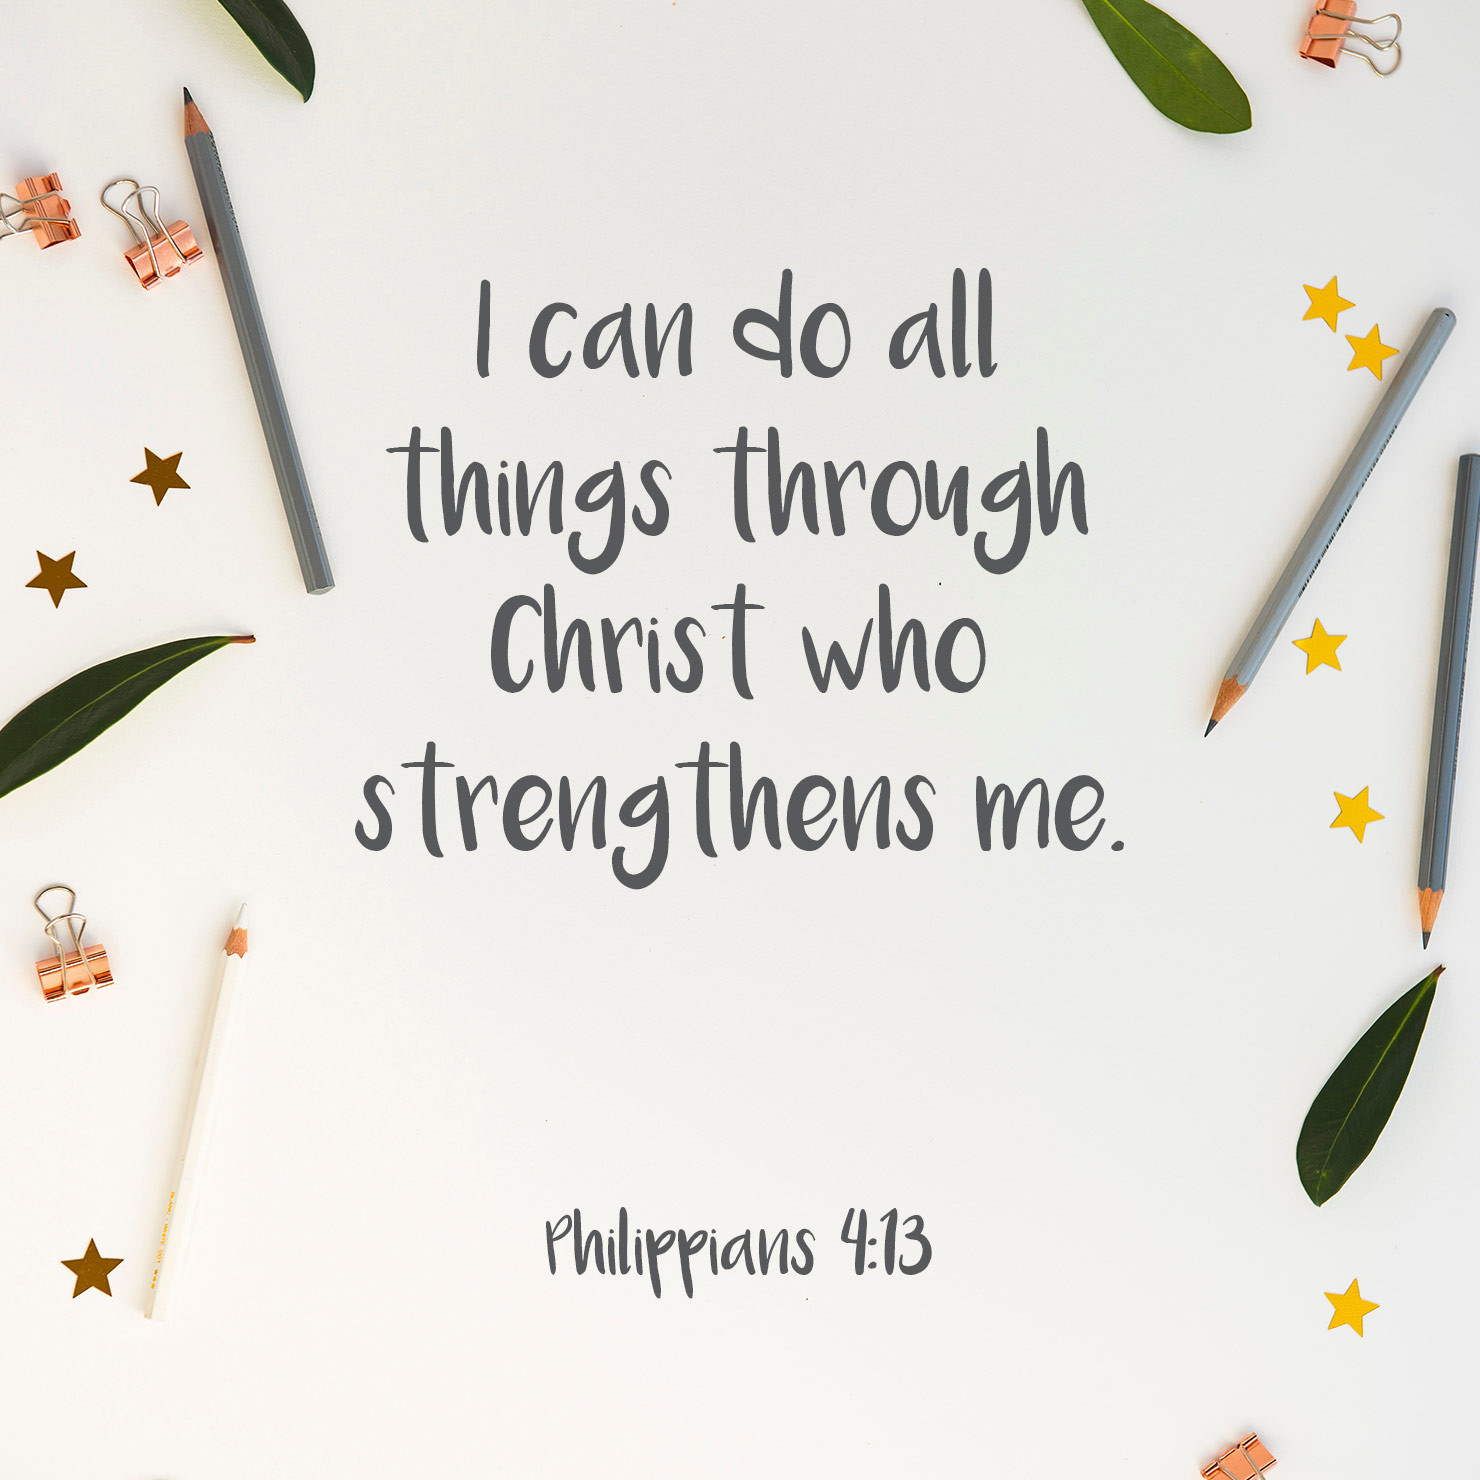 Christian Graduation Quotes
 100 Graduation Quotes and Sayings 2019